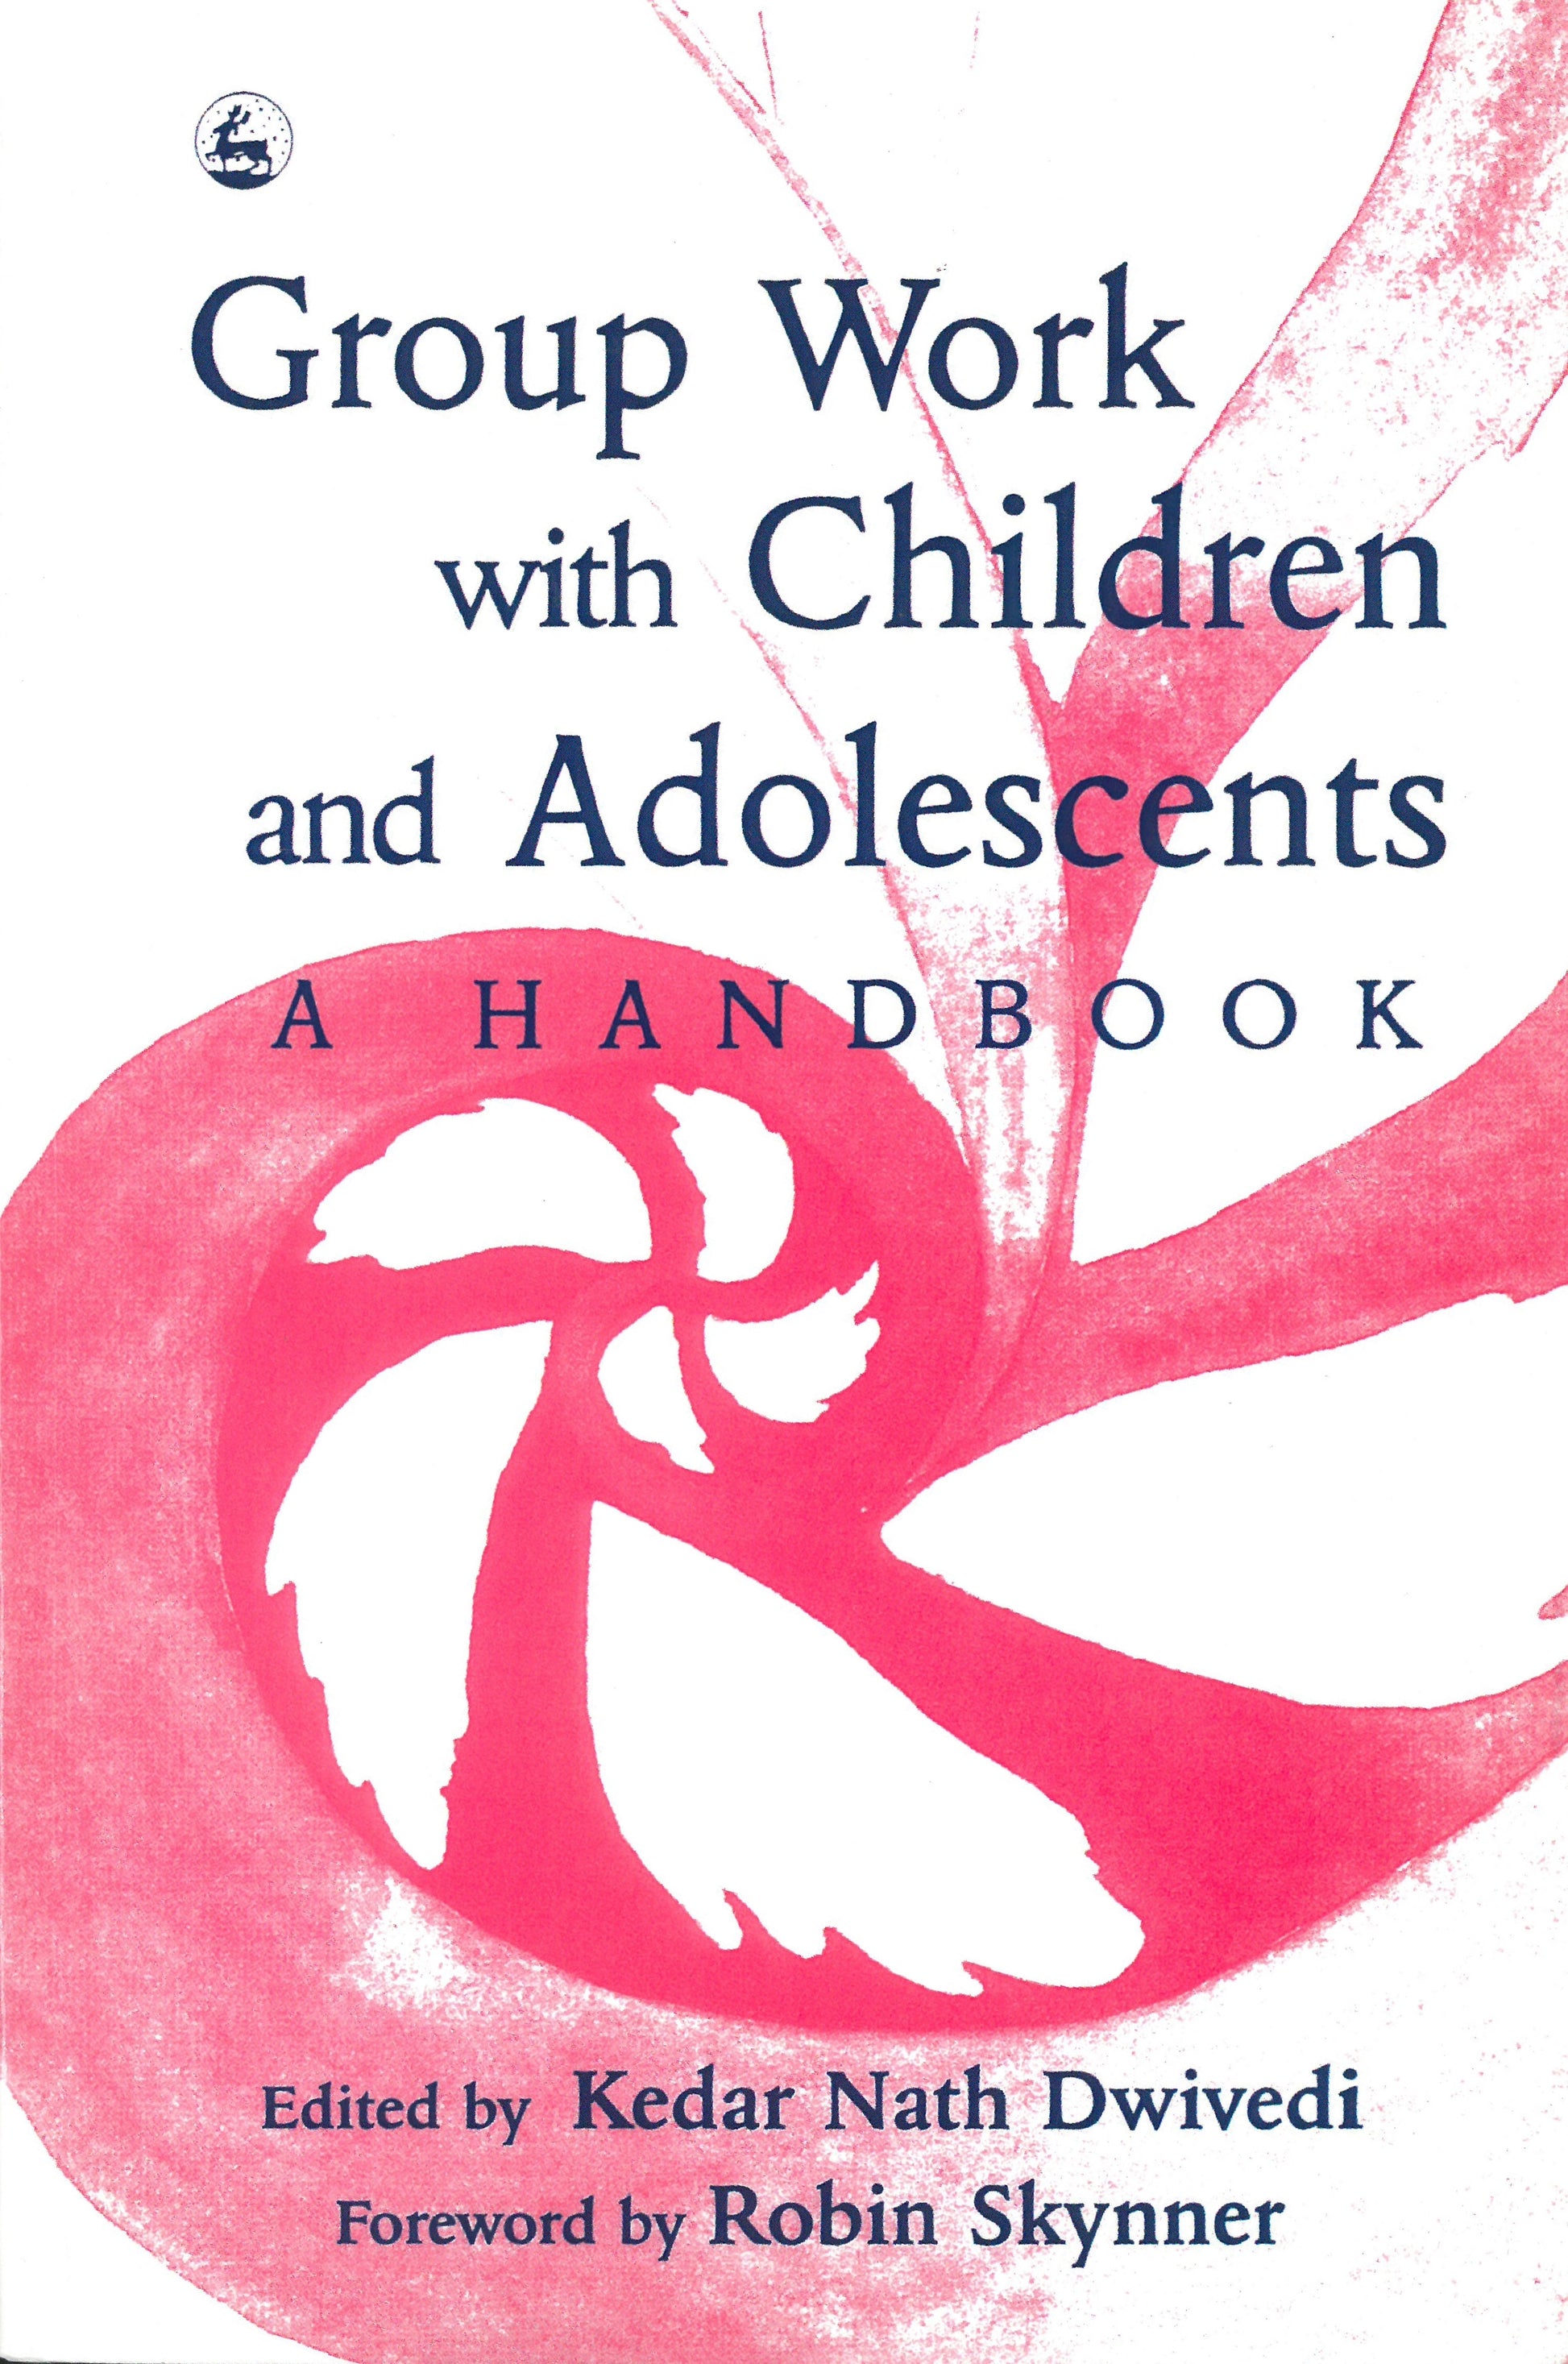 Group Work with Children and Adolescents by Kedar Nath Dwivedi